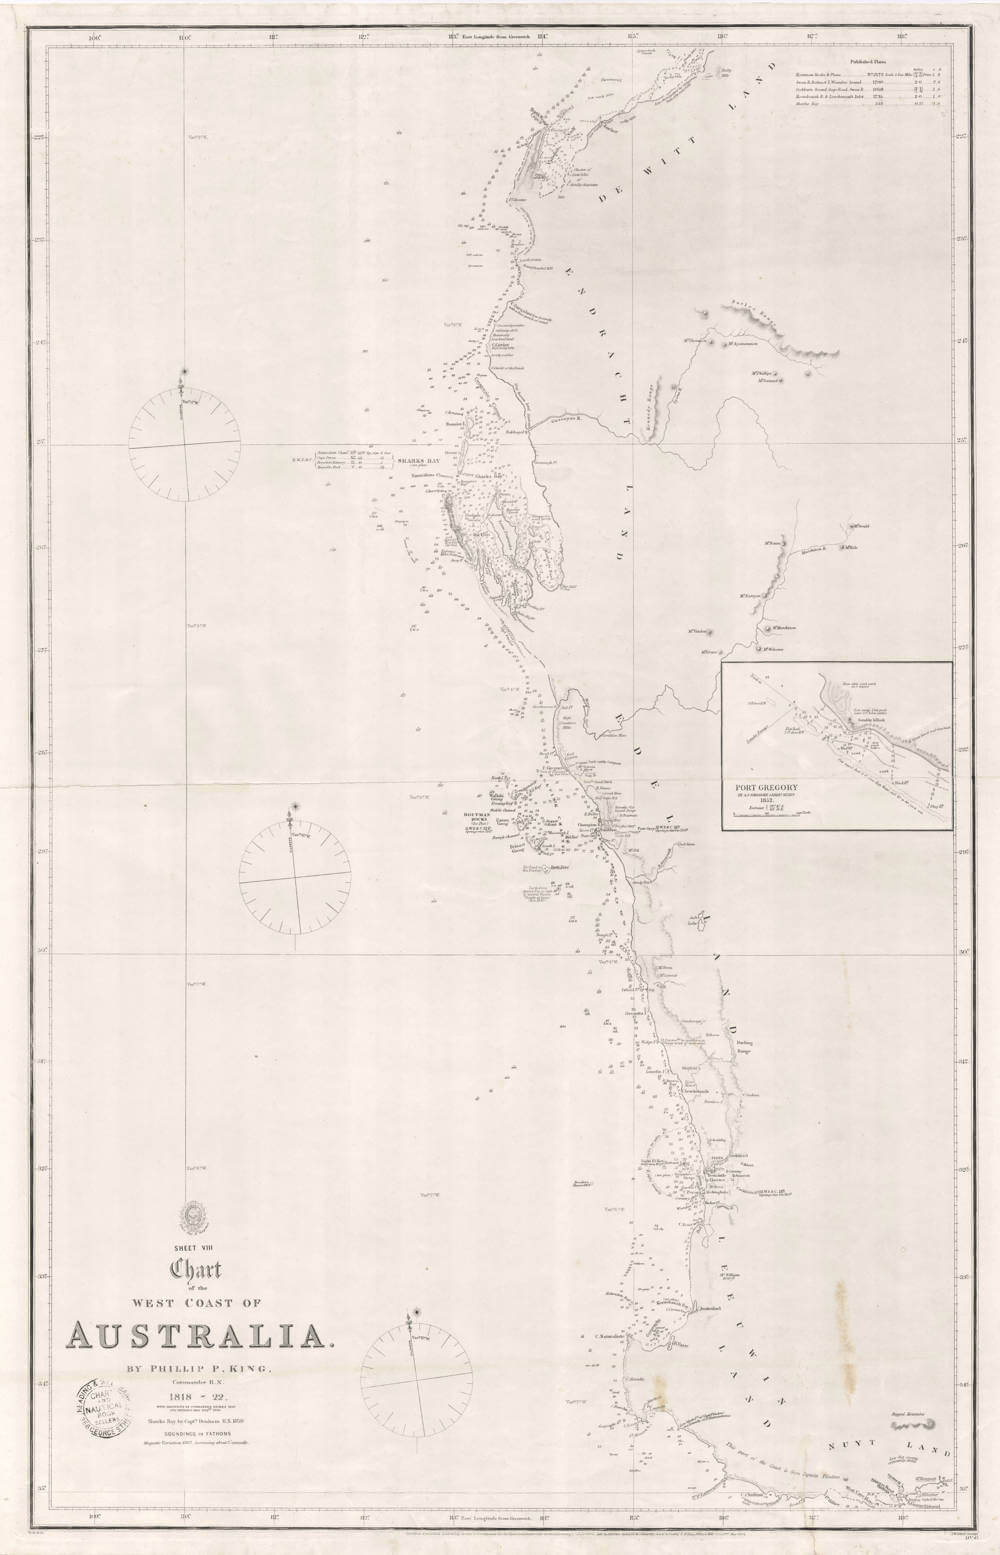 Antique map of Western Australia by Philip Parker King